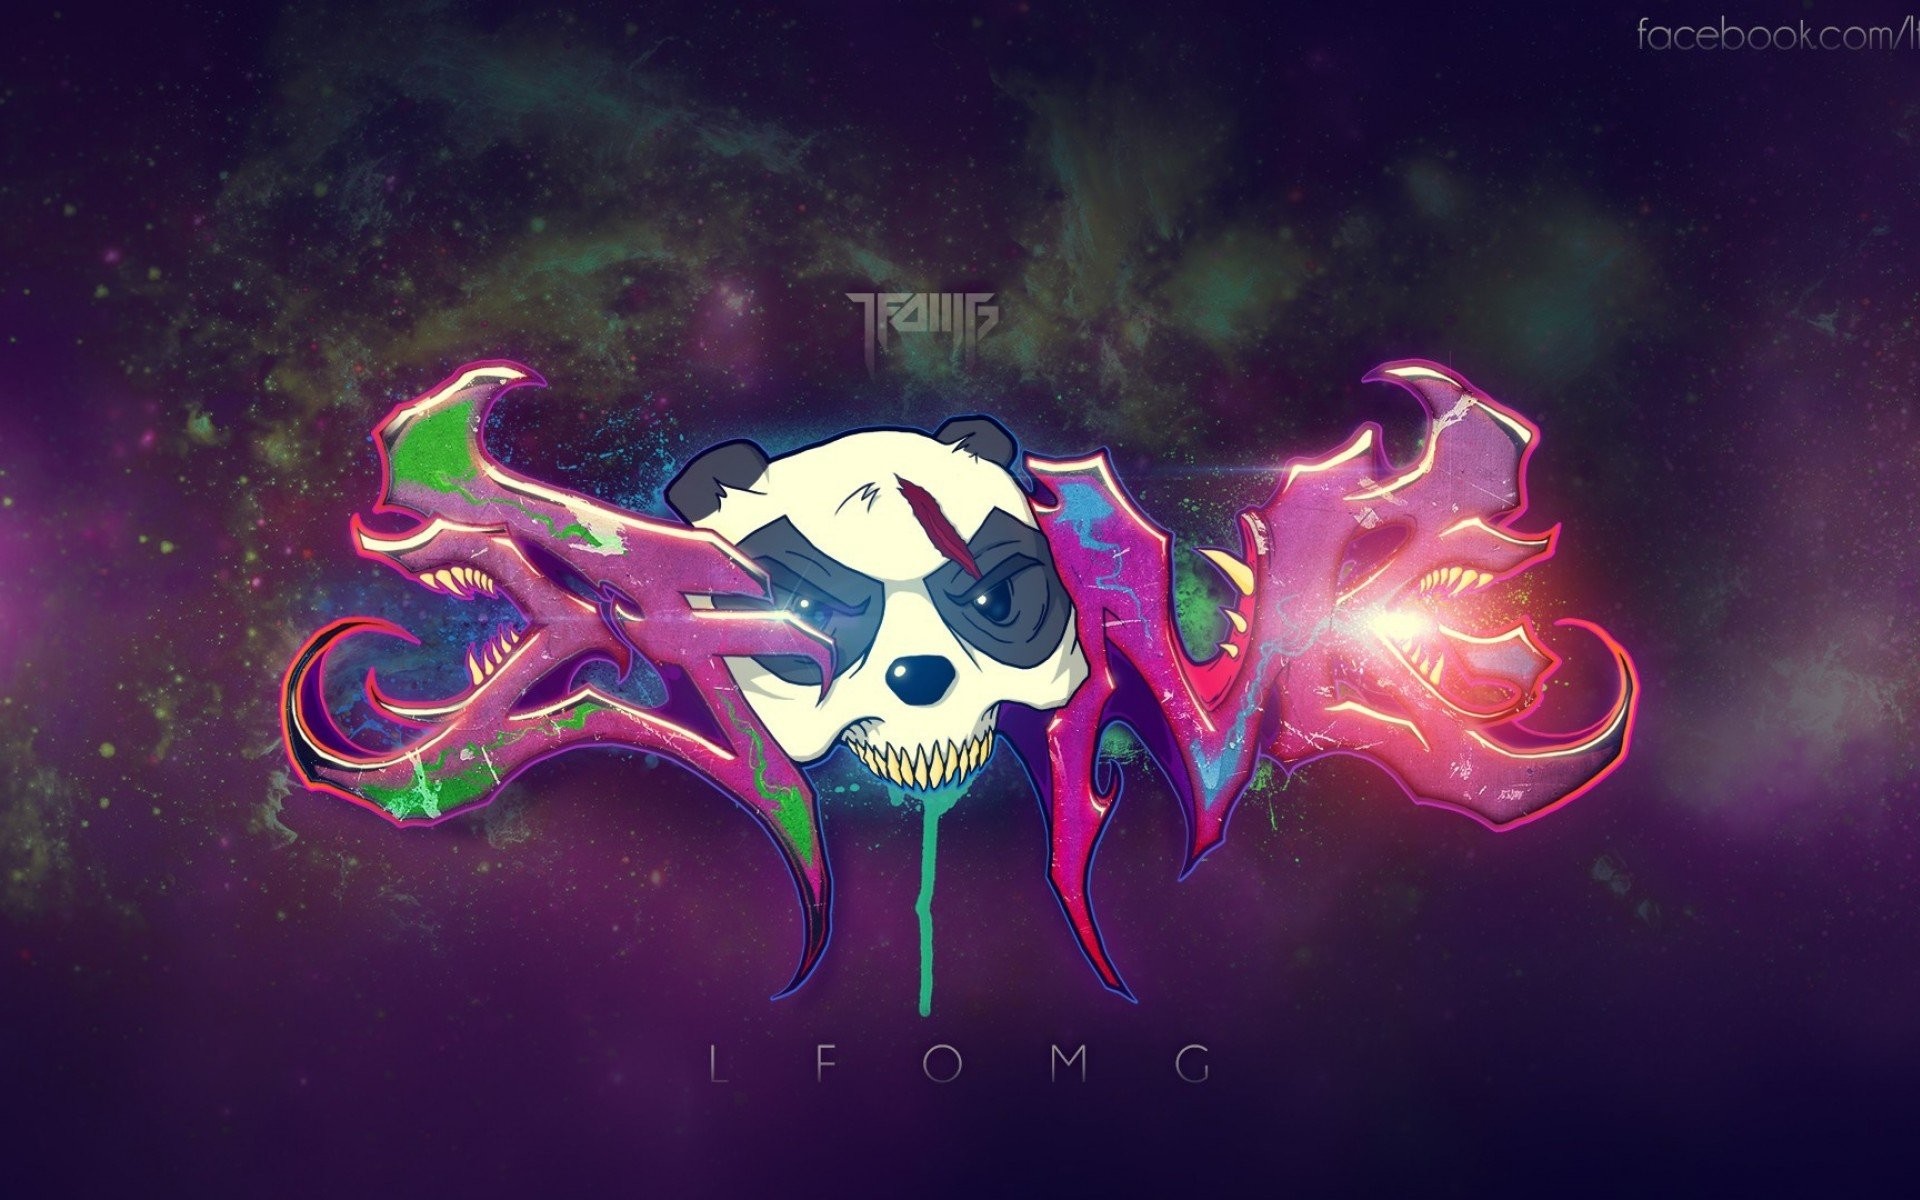 533926 1920x1080 skull abstract smoke texture youtube water cooling electro dubstep  wallpaper JPG 727 kB  Rare Gallery HD Wallpapers